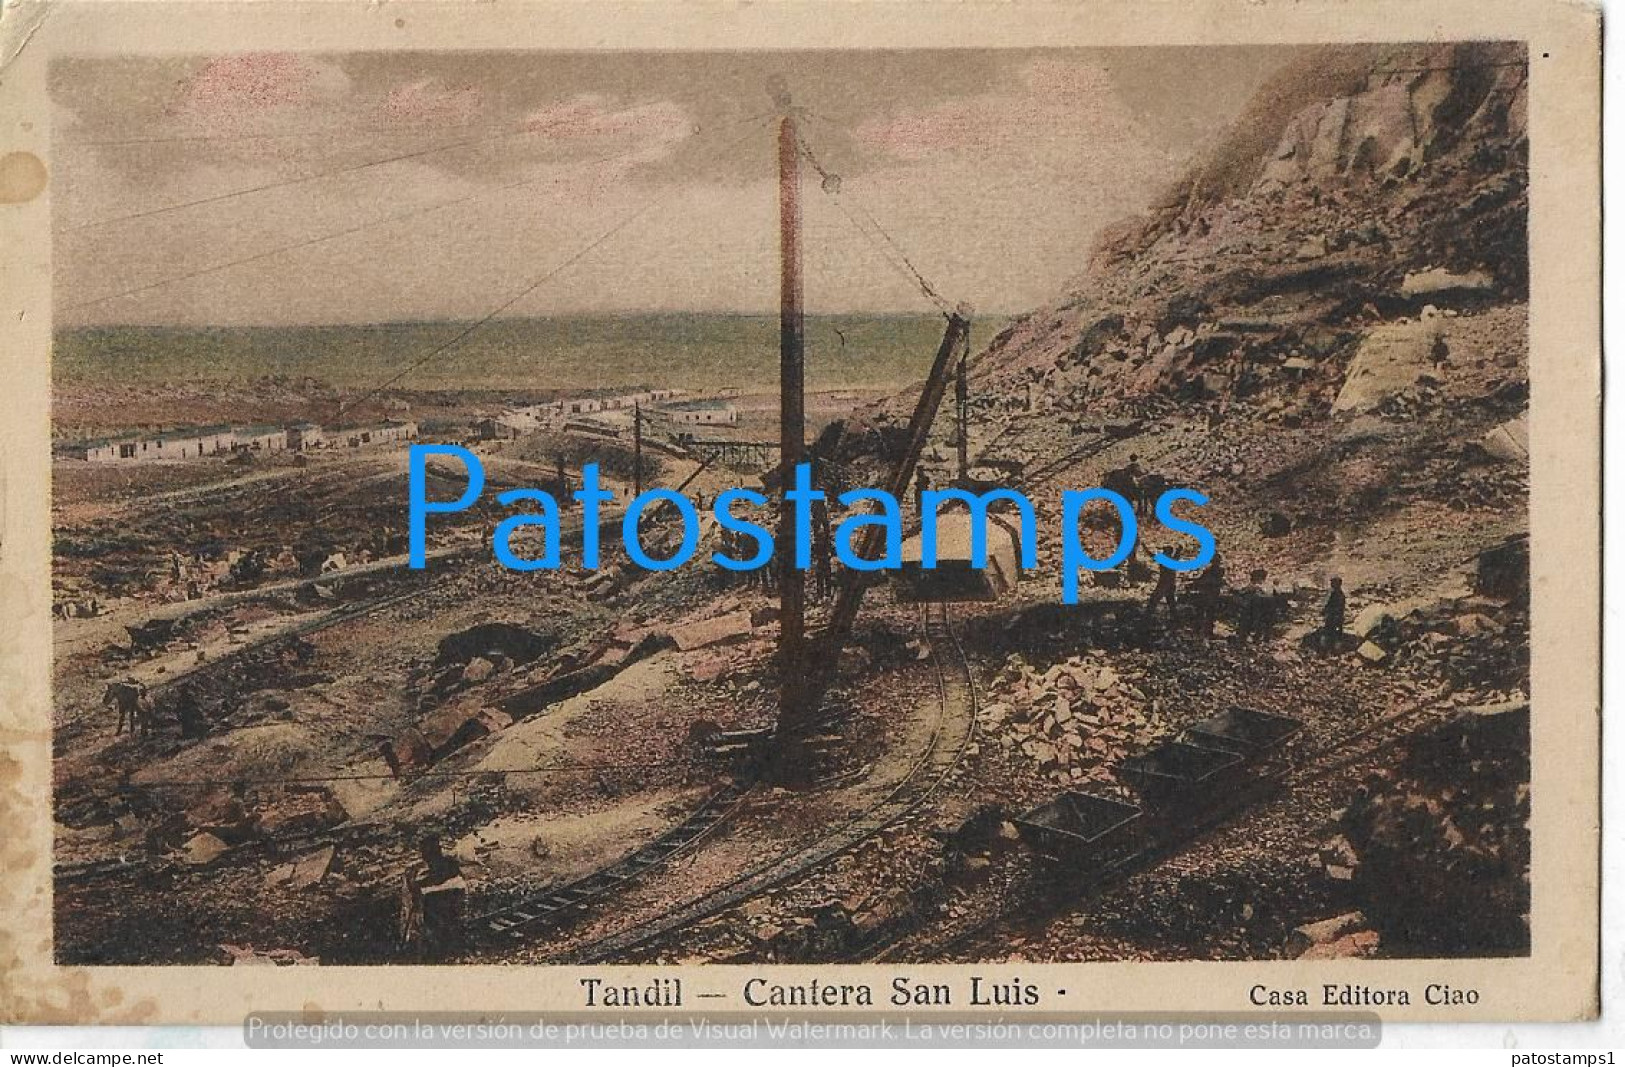 228346 ARGENTINA BUENOS AIRES TANDIL CANTERA SAN LUIS & RAILROAD SPOTTED POSTAL POSTCARD - Argentine